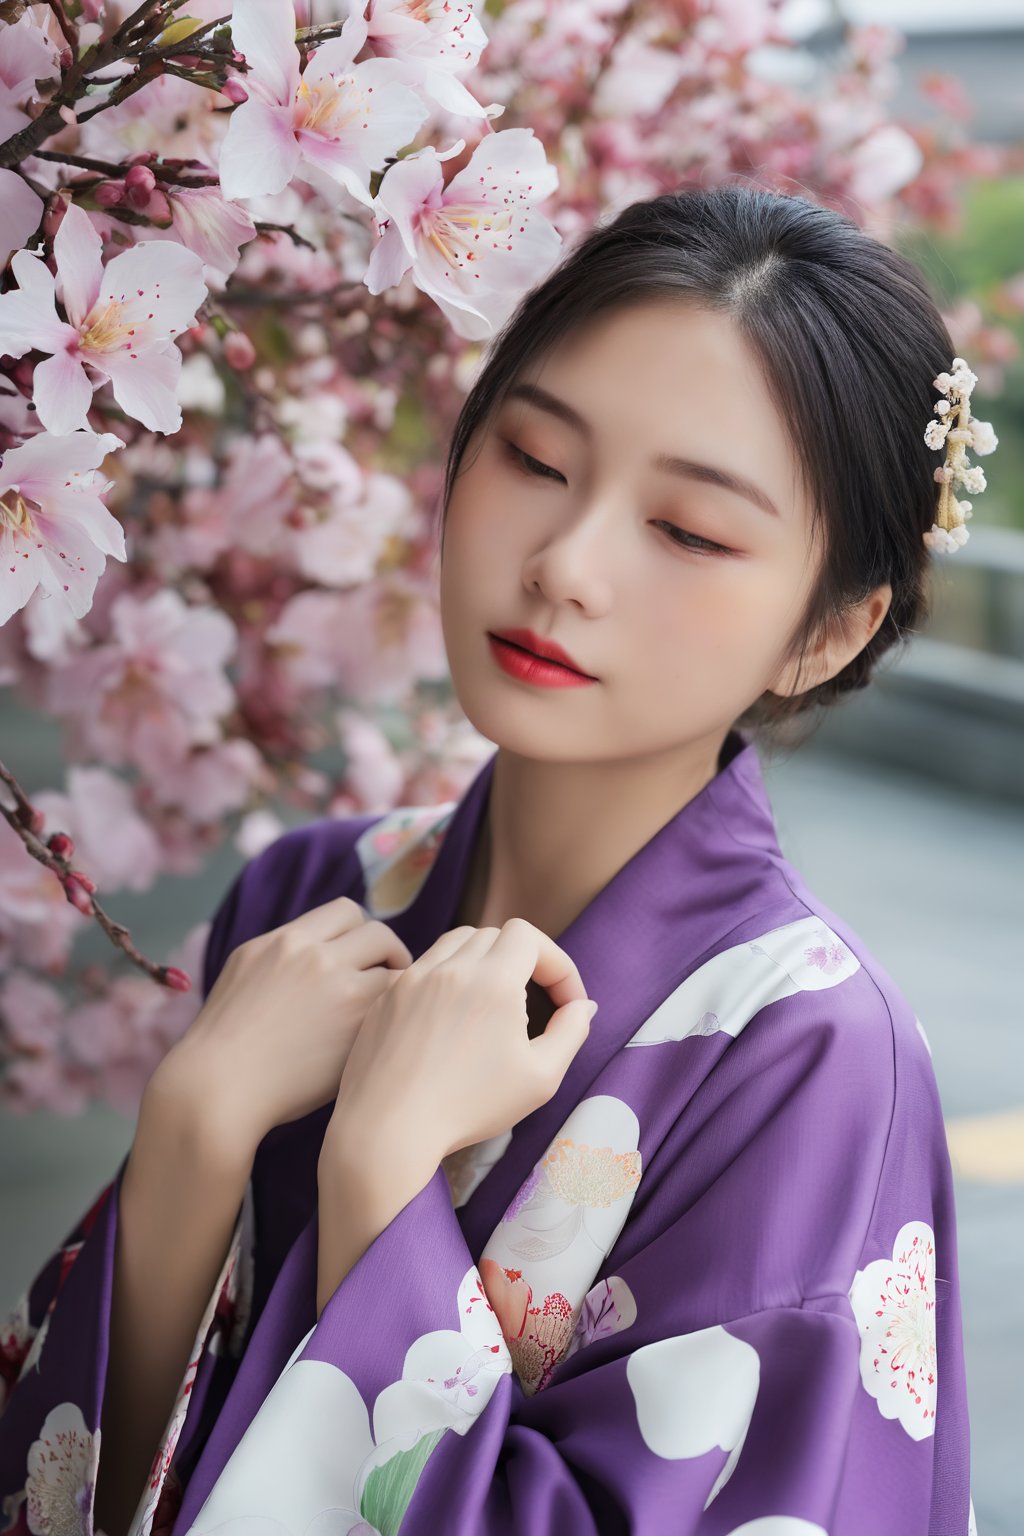 Surreal Portrait Photography of hubggirl, 
ultra realistic,best quality ,photorealistic,Extremely Realistic, in depth, cinematic light,

((Kyoto, detailed floral kimono, purple kimono, outdoor)), half updo, happiness, 

perfect hands, perfect lighting, vibrant colors, intricate details, high detailed skin, intricate background, 
realistic, raw, analog, taken by Canon EOS,SIGMA Art Lens 35mm F1.4,ISO 200 Shutter Speed 2000,Vivid picture, 